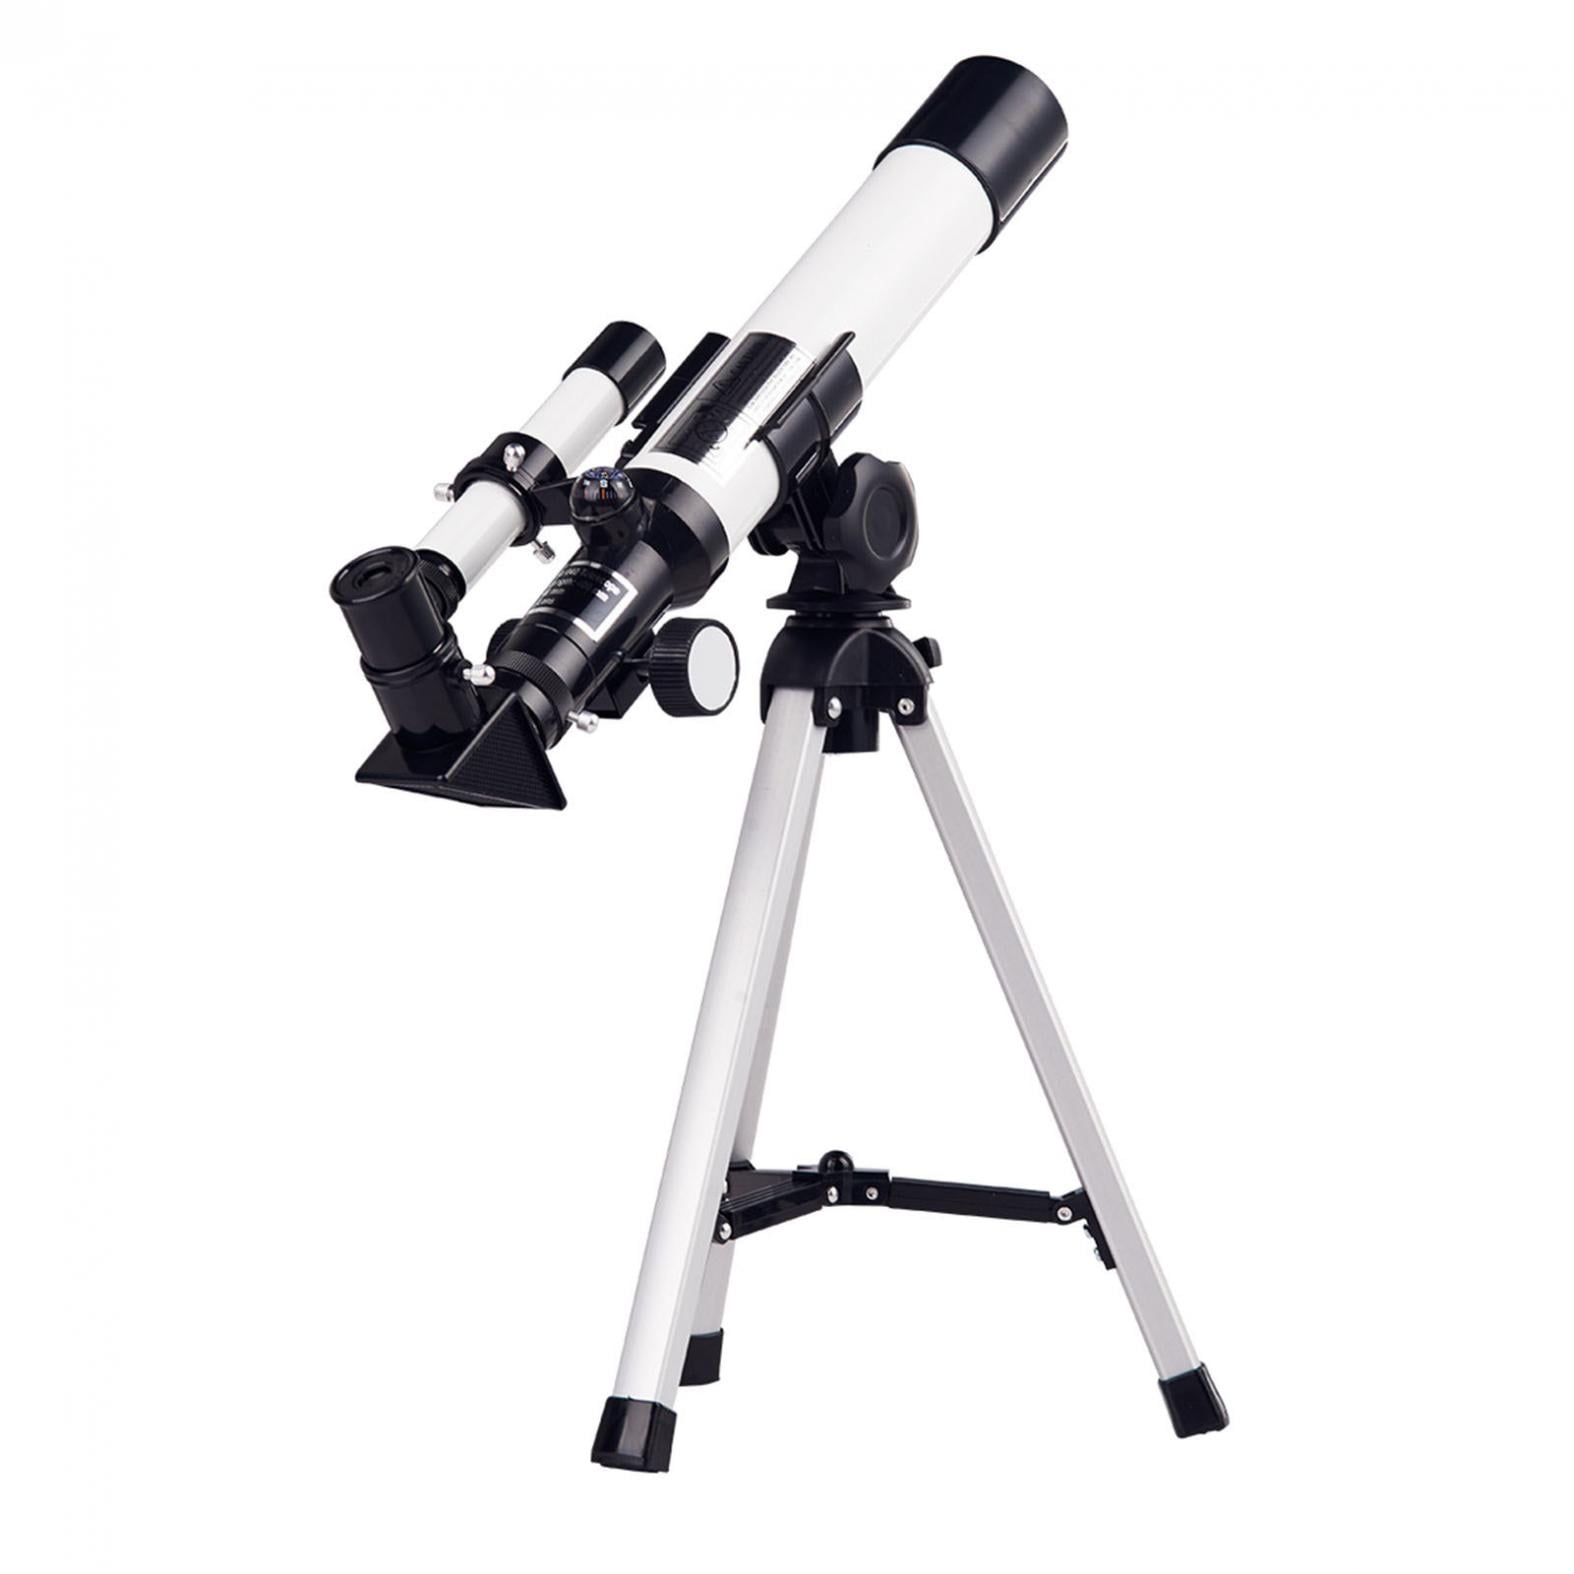 Christmas Holiday Camping Travel Stargazing Gift 400mm Focal Length Multiple Deep Space Refractor Telescope for Adults Kids Students & Beginners TT&Louis High Magnification Astronomical Telescope 